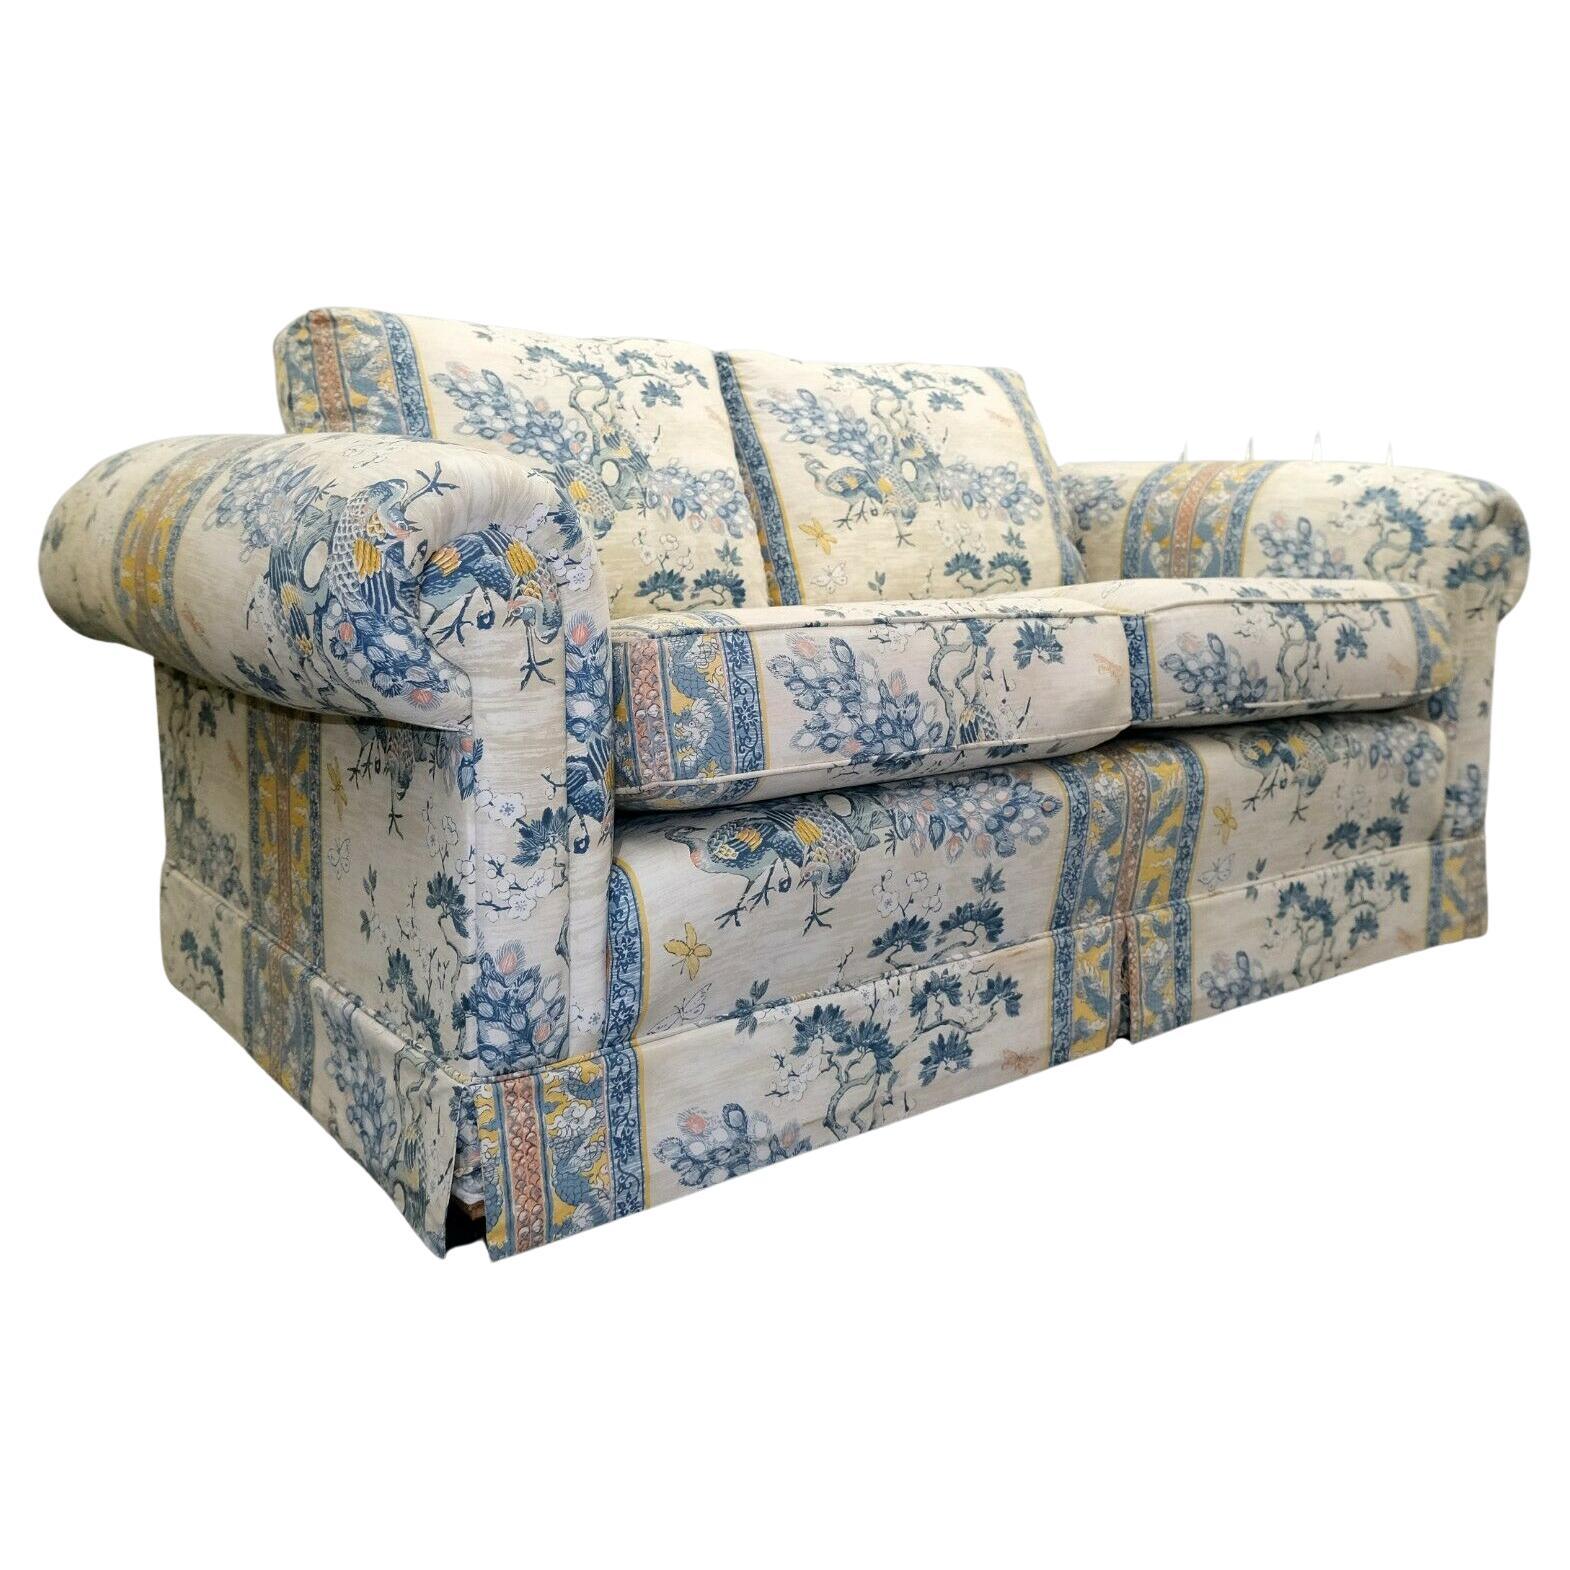 We are delighted to offer for sale this elegant floral sofa with roll arms and reversible cushions.

This well-made upholsterd sofa, by Ashley Lawrence, is in very good condition. The seat cushions are foam filled still having the comfy feeling,